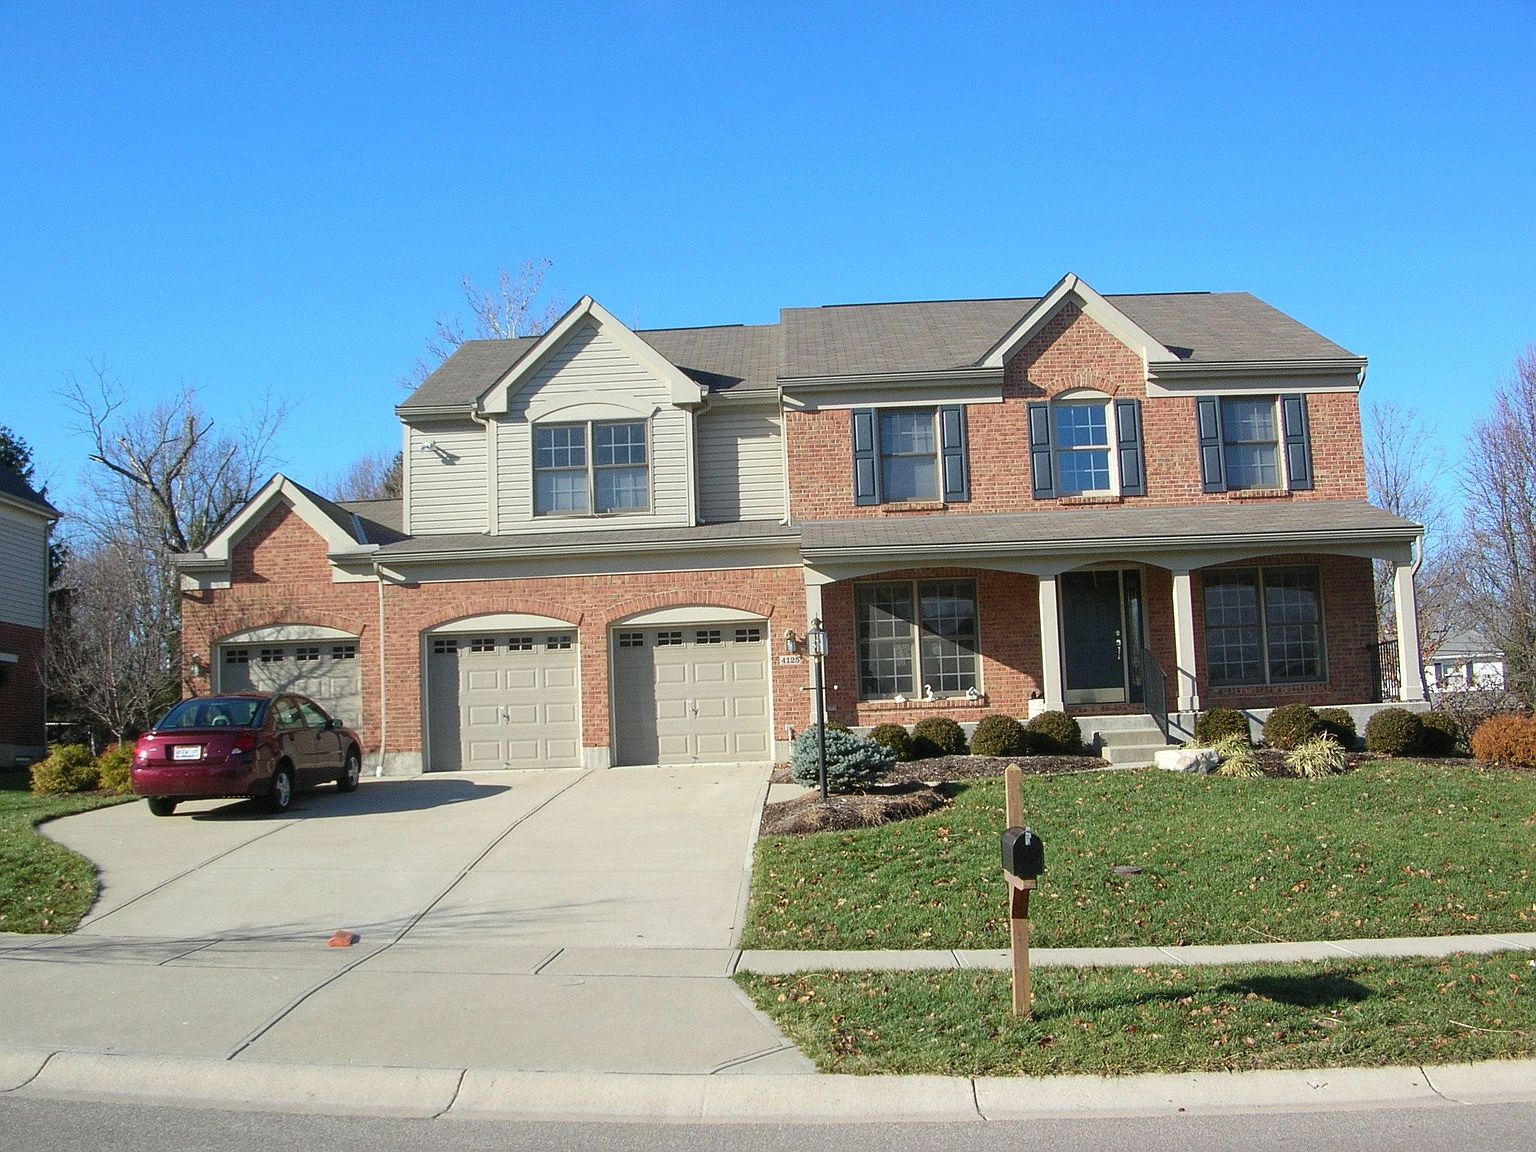 4125 Wenbrook Dr, Sharonville, OH 45241 Zillow